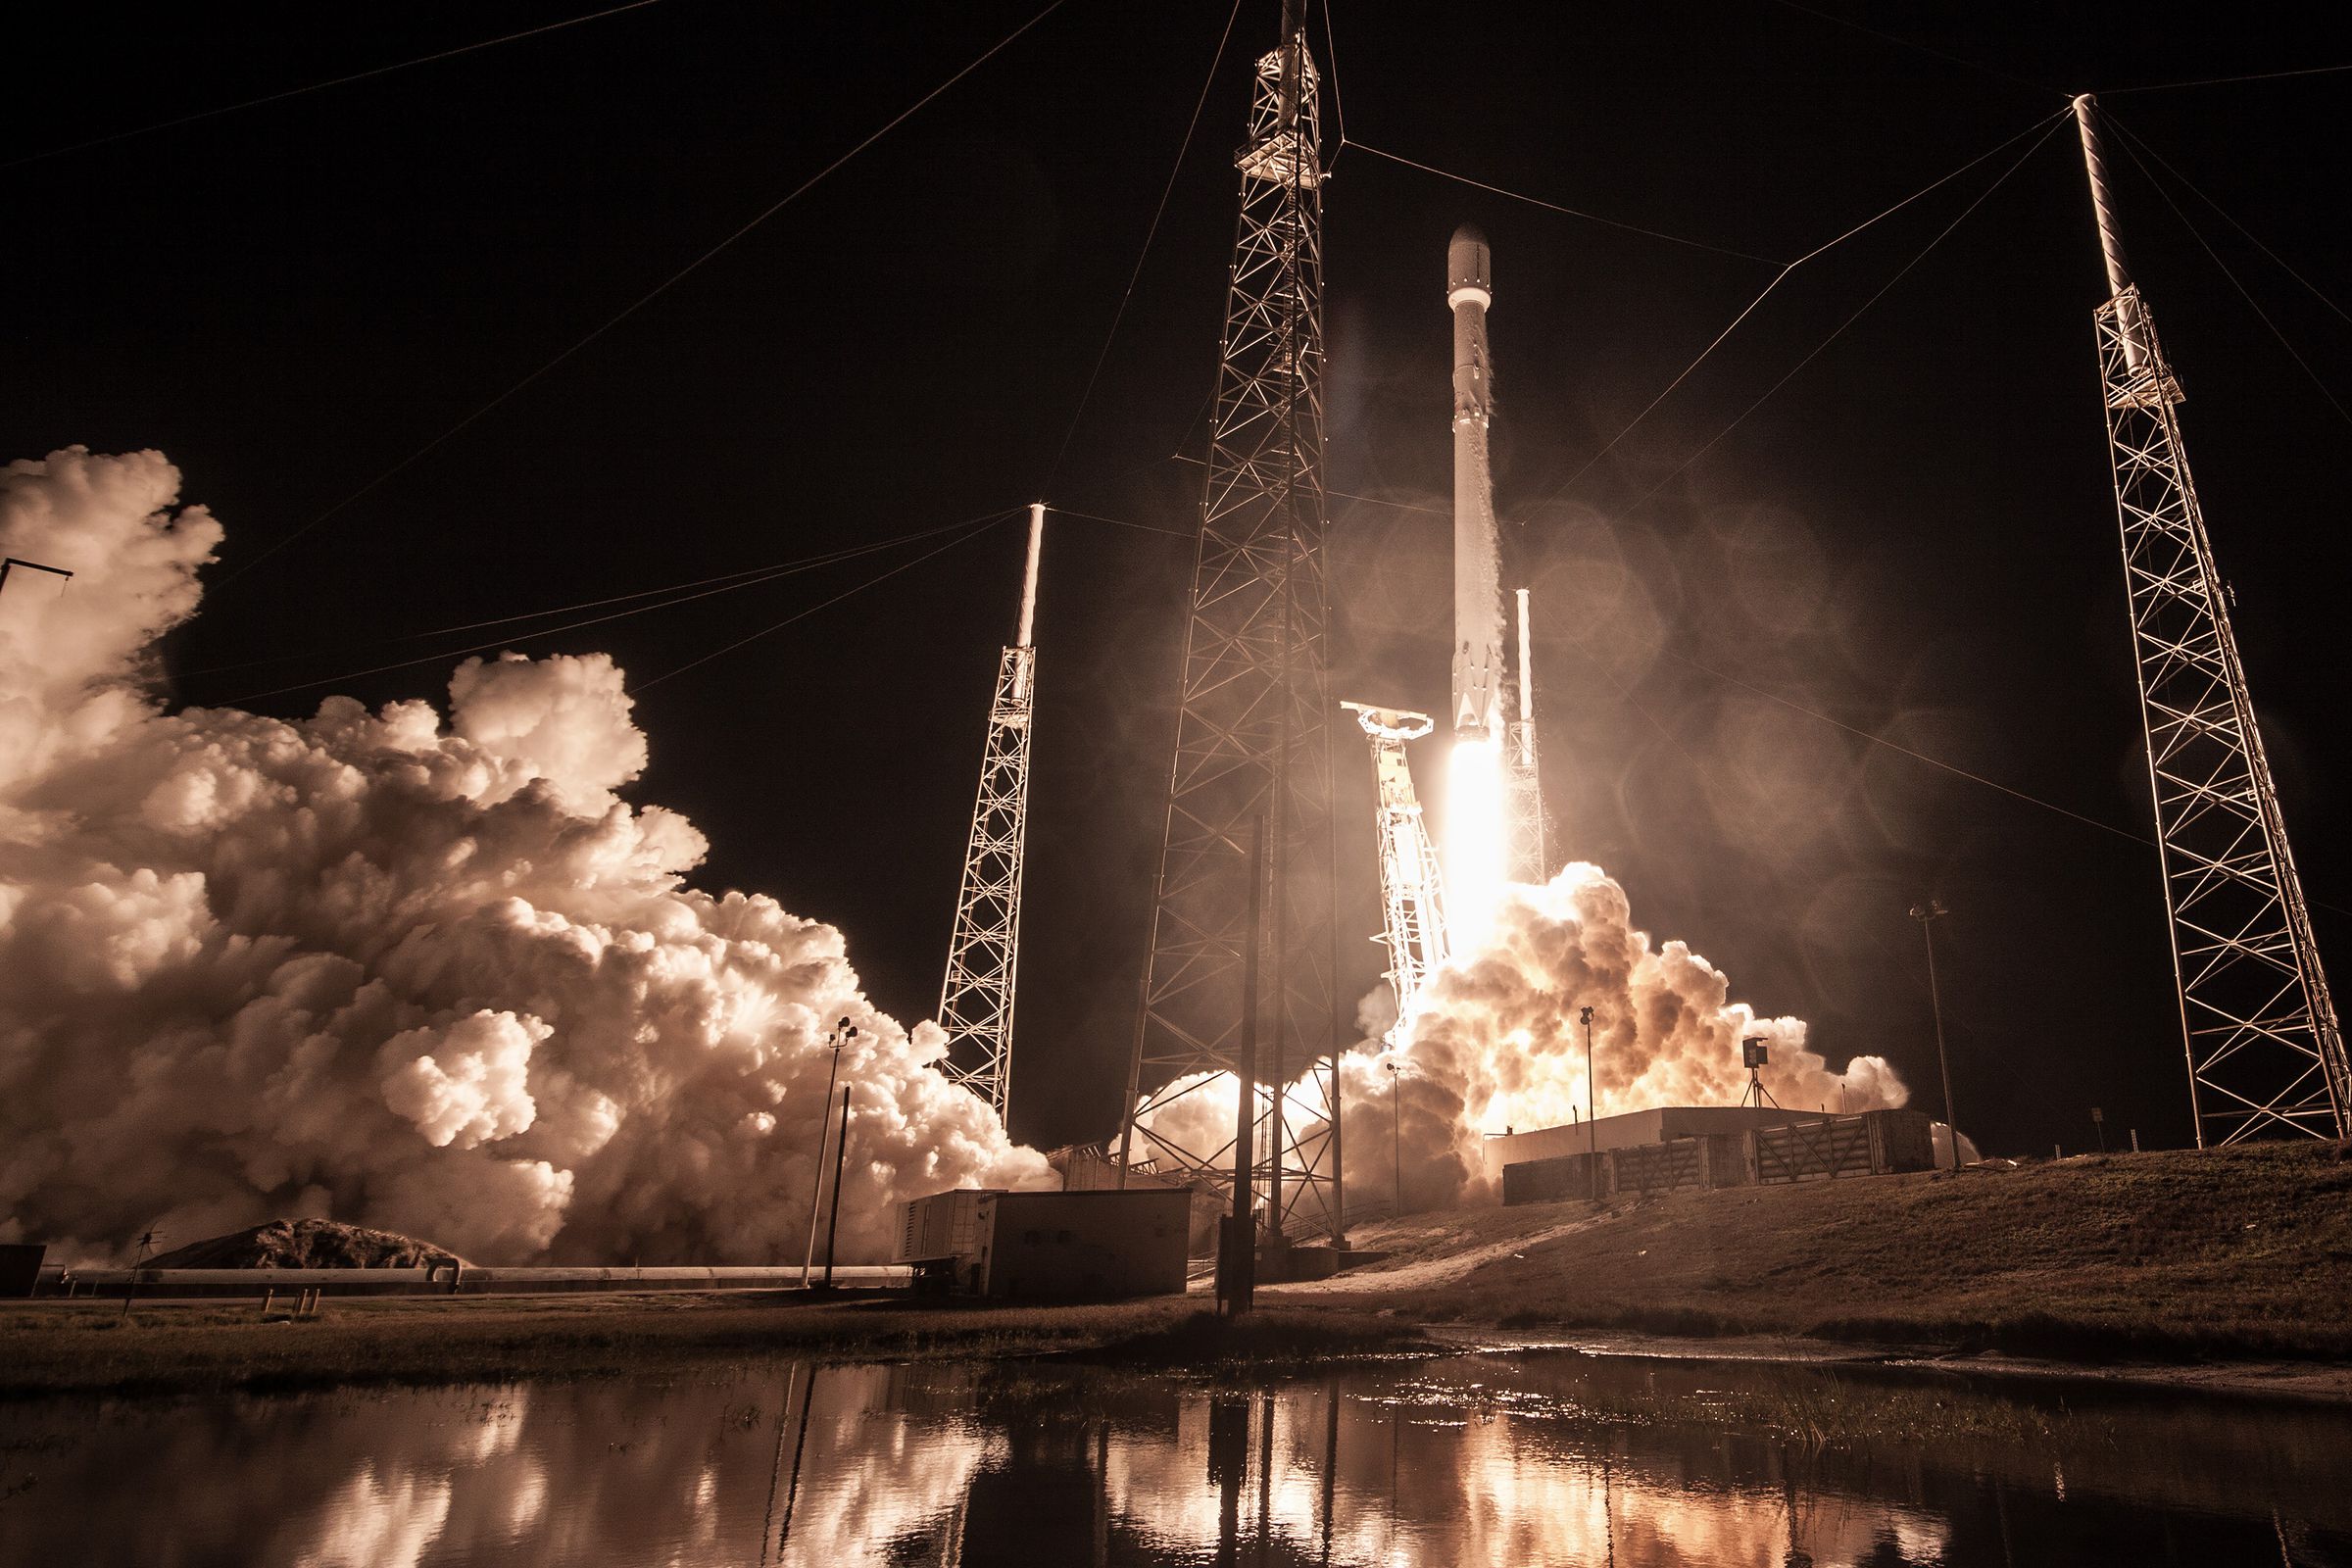 SpaceX’s Falcon 9 taking off with Zuma on board